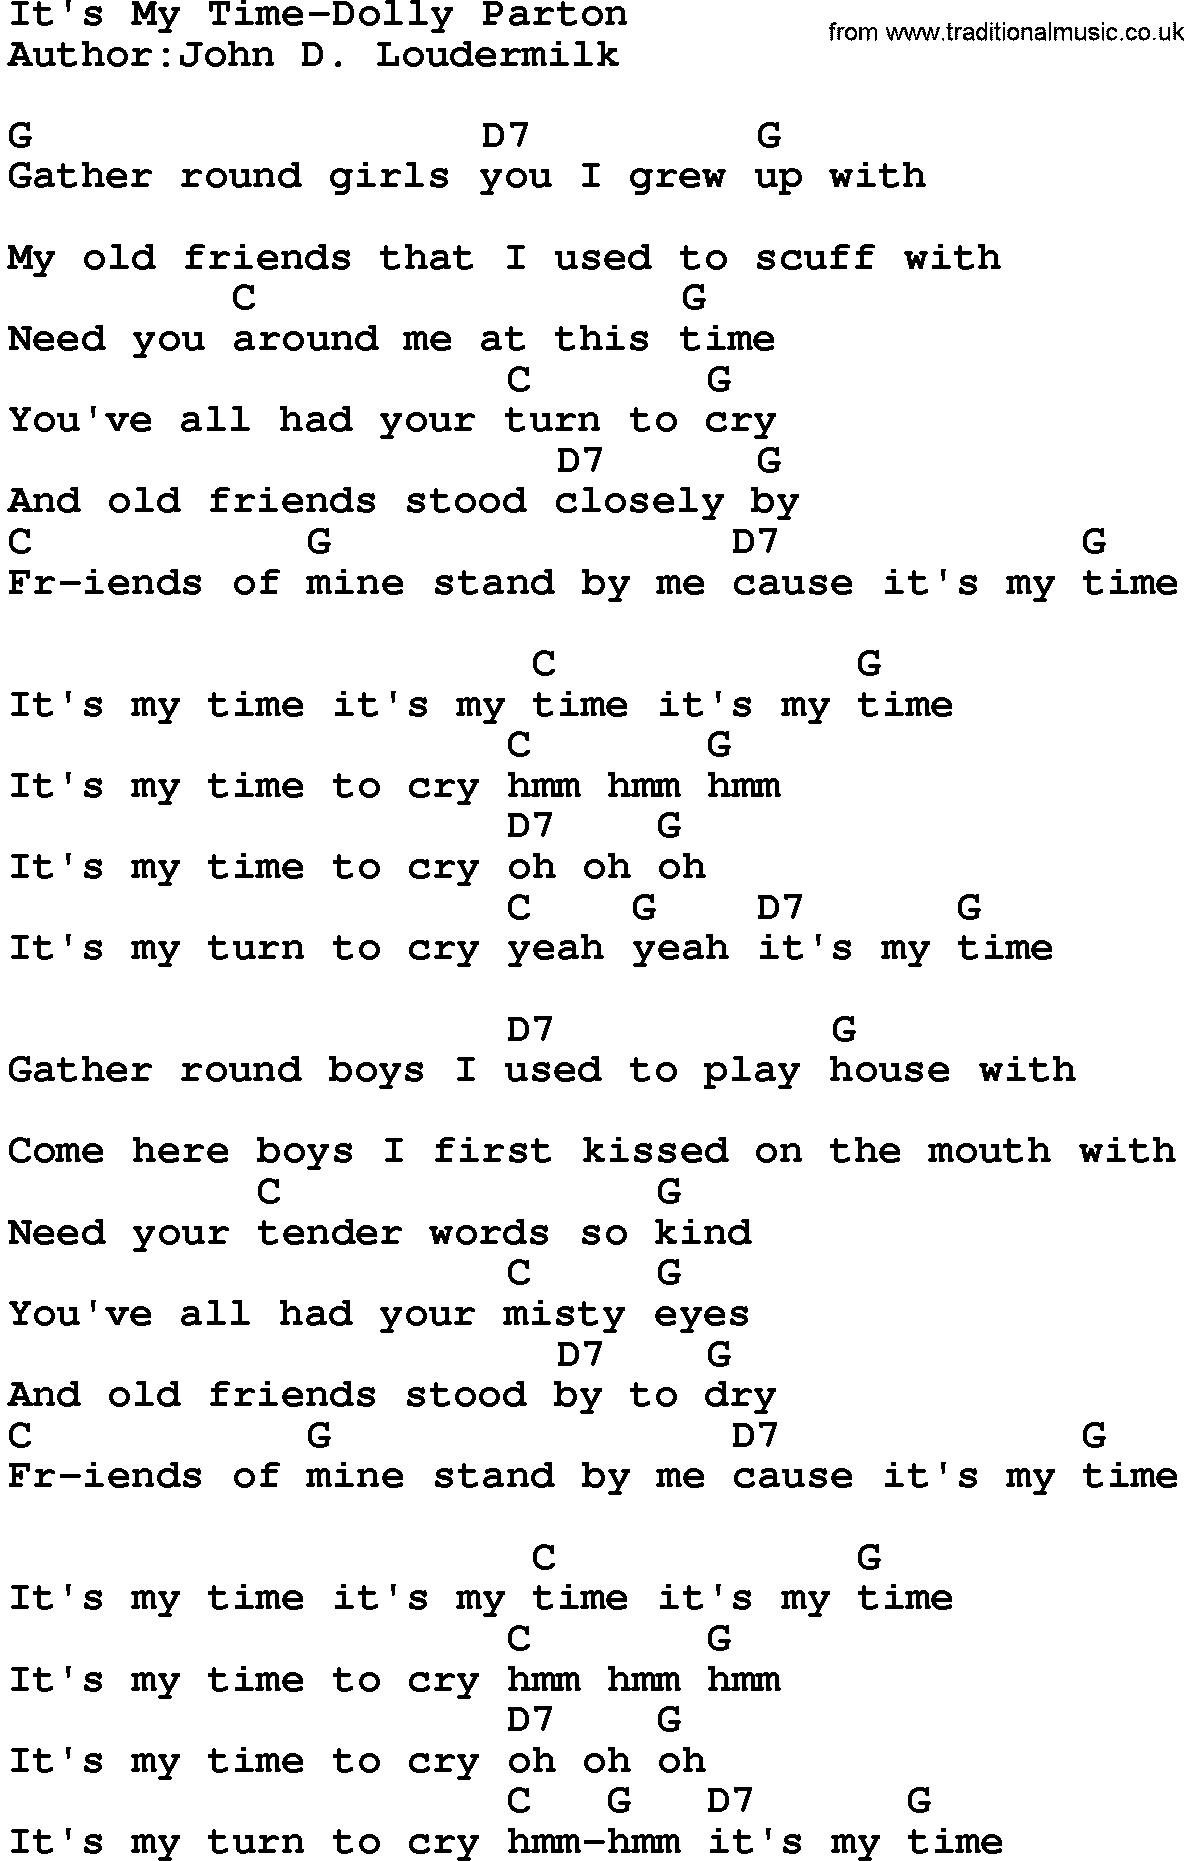 Country music song: It's My Time-Dolly Parton lyrics and chords